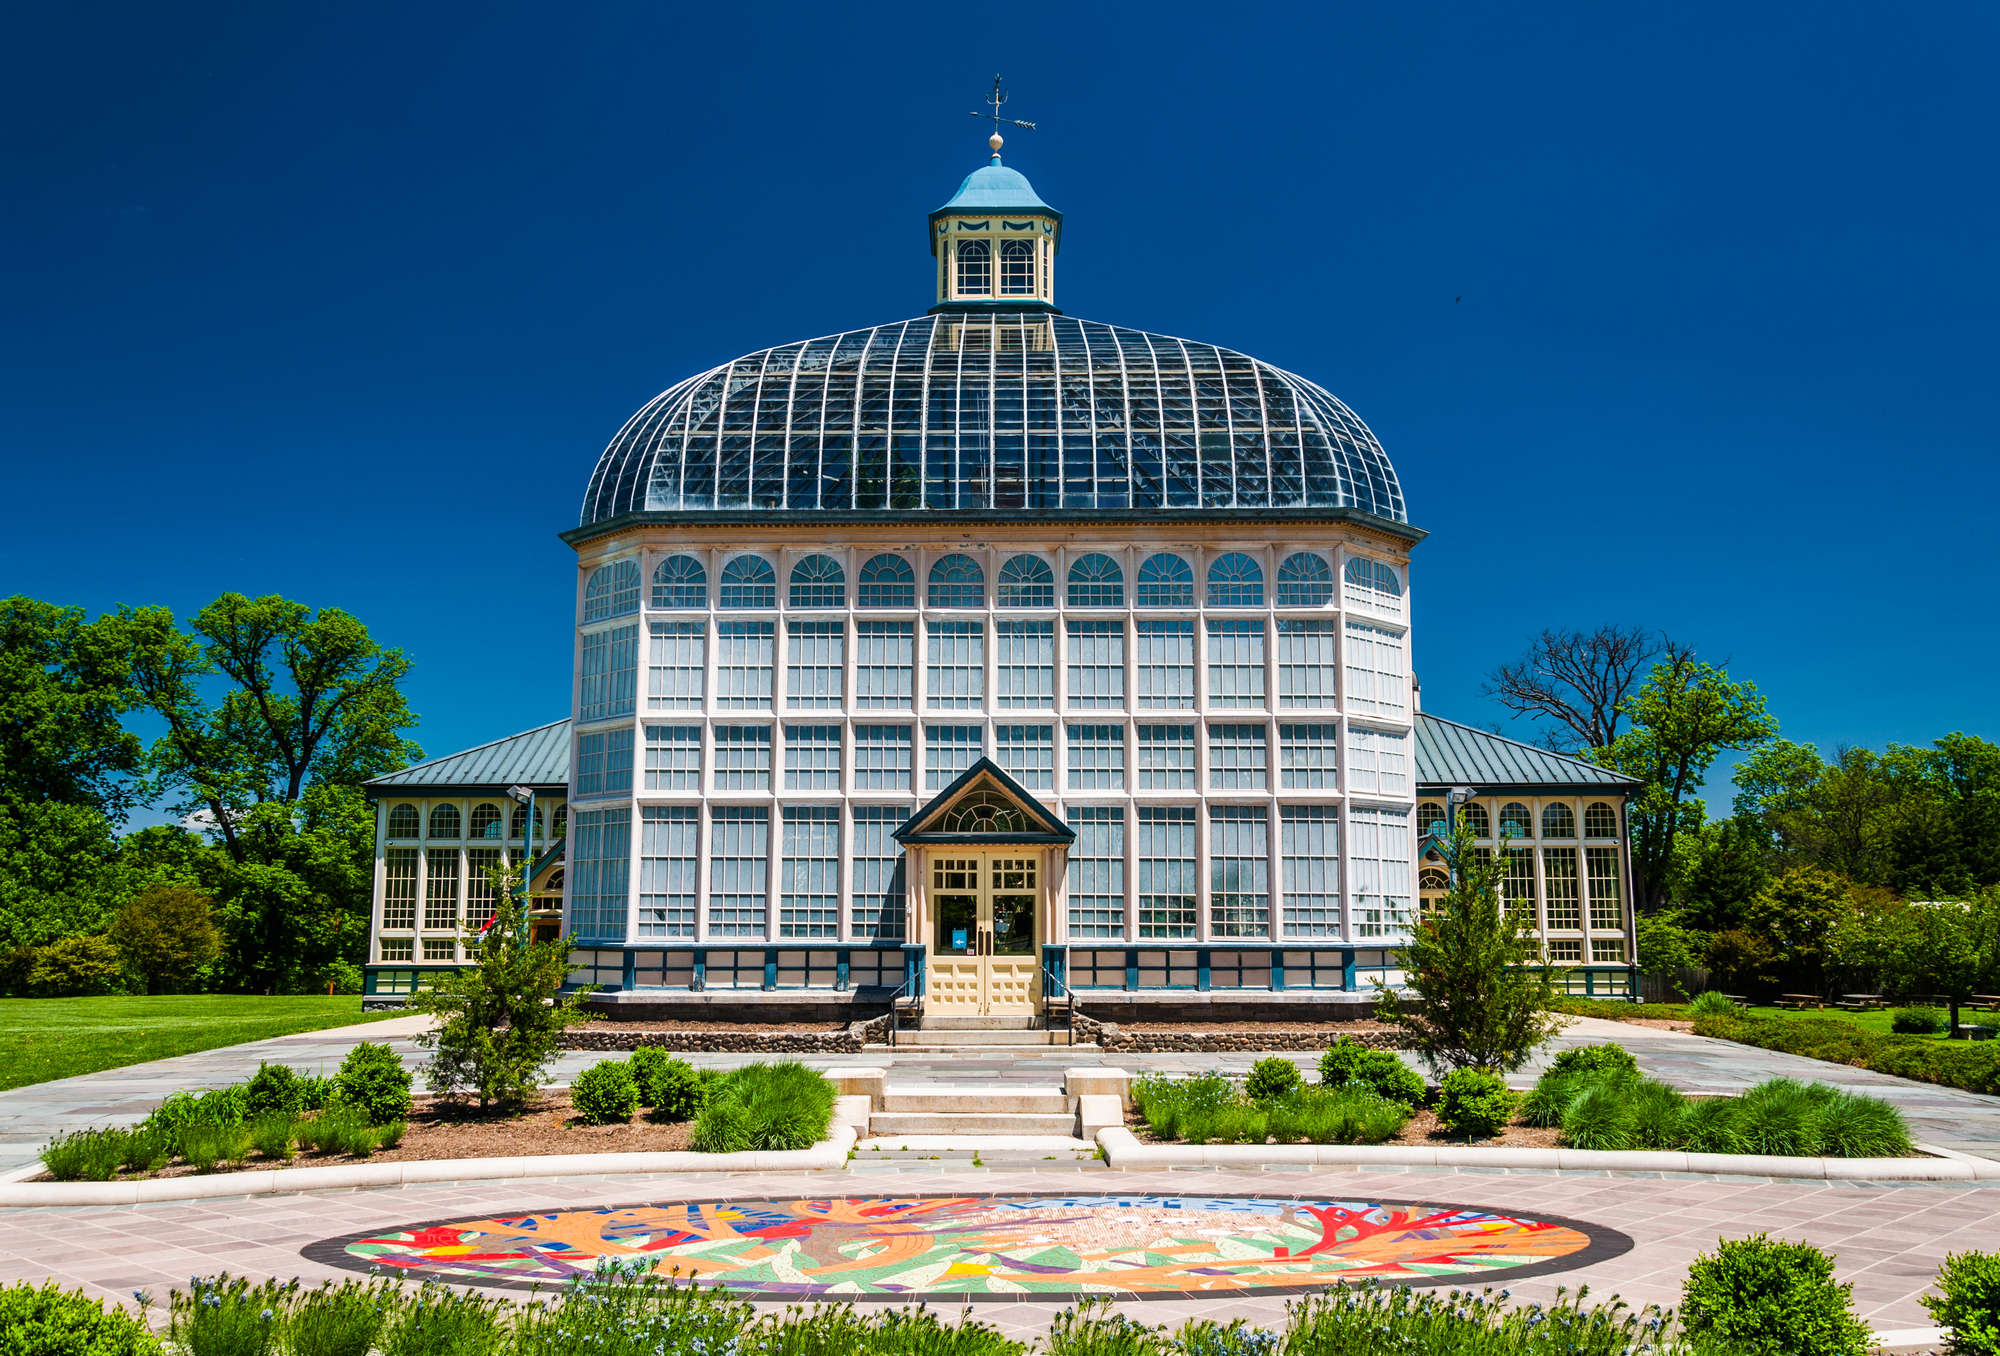 A large Maryland building with a dome on top hosting the Day Festival.